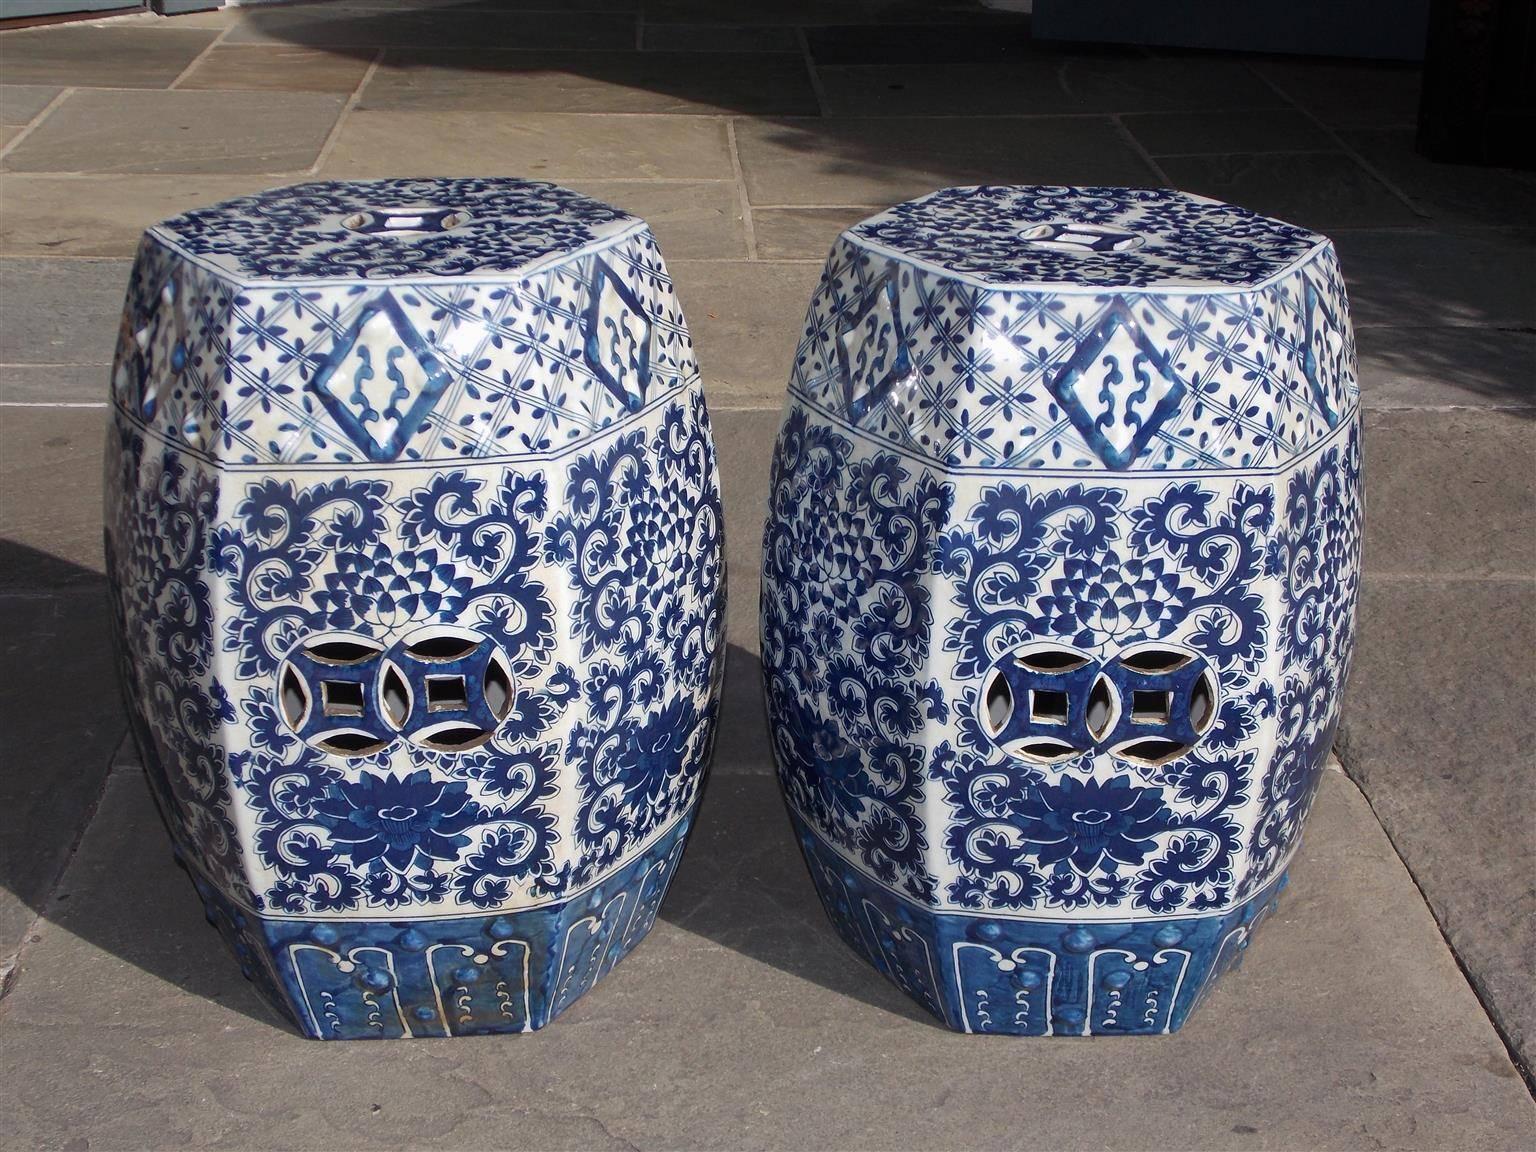 Pair of Chinese porcelain glazed hexagon garden benches with vibrant floral colors, circular decorative cutouts, diamond motif, and resting on a cobalt border at base, 20th Century
Benches are 11